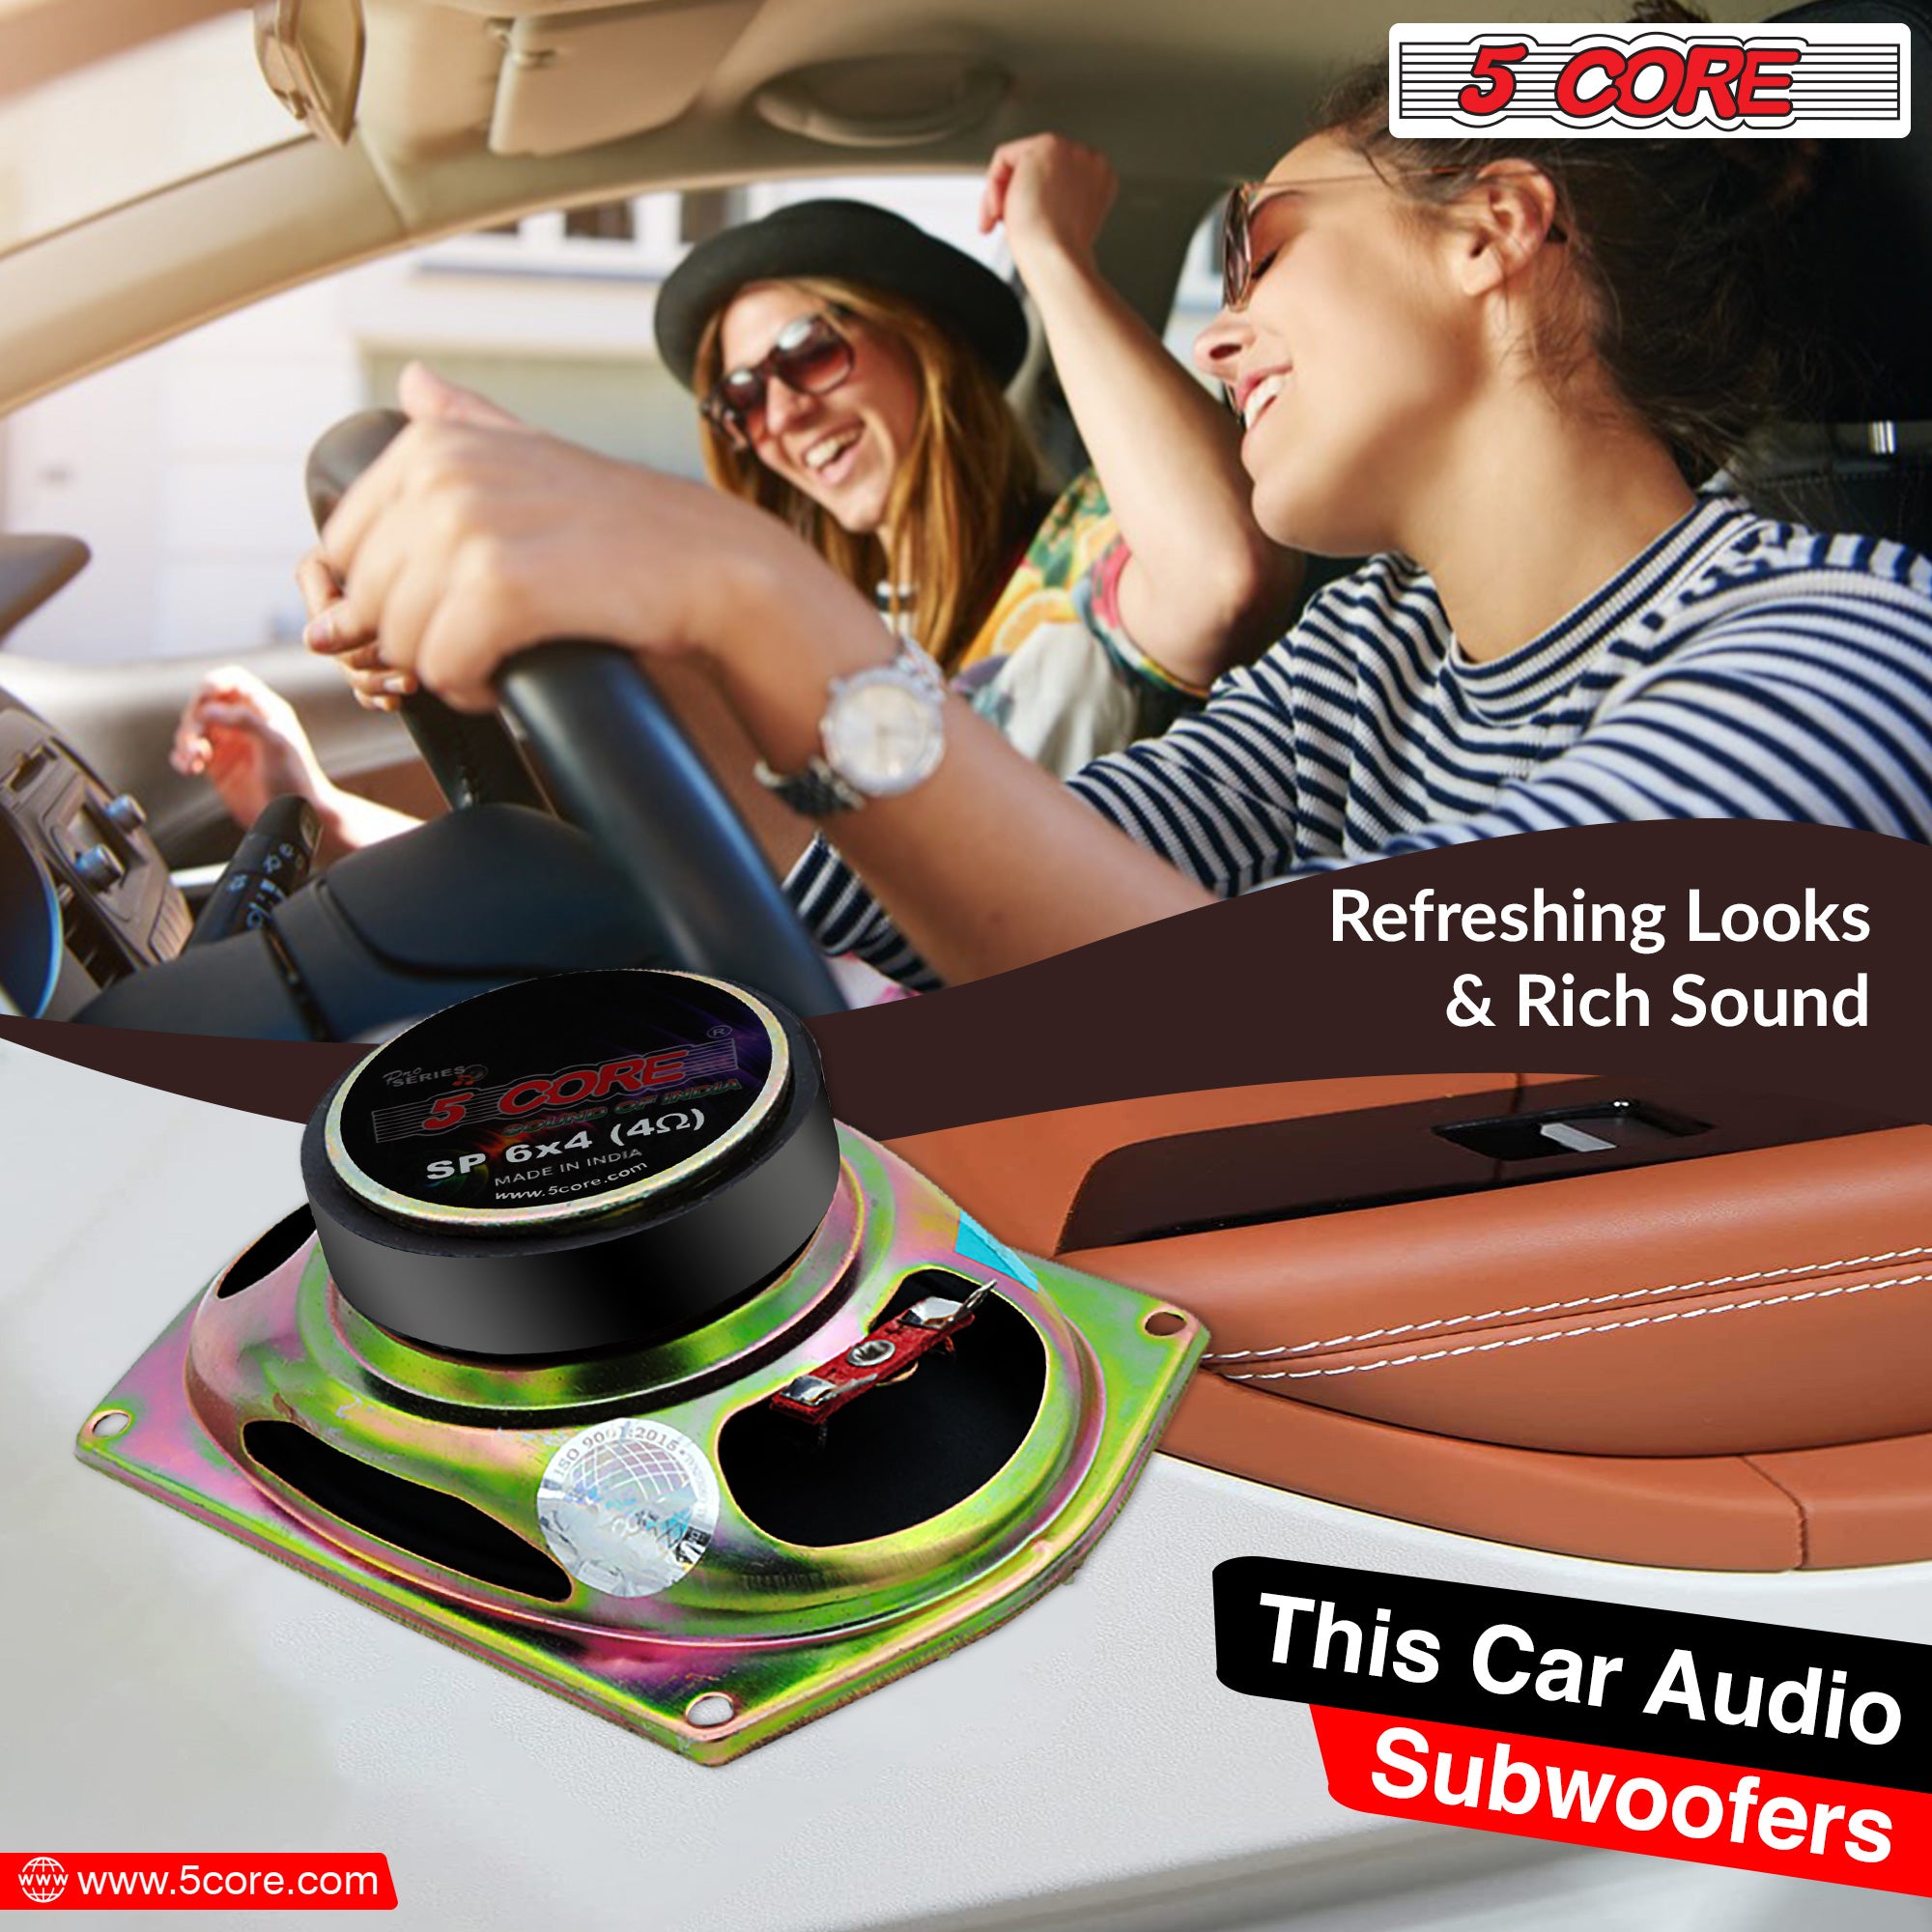 Refreshing Looks & rich Sound for Car Audio